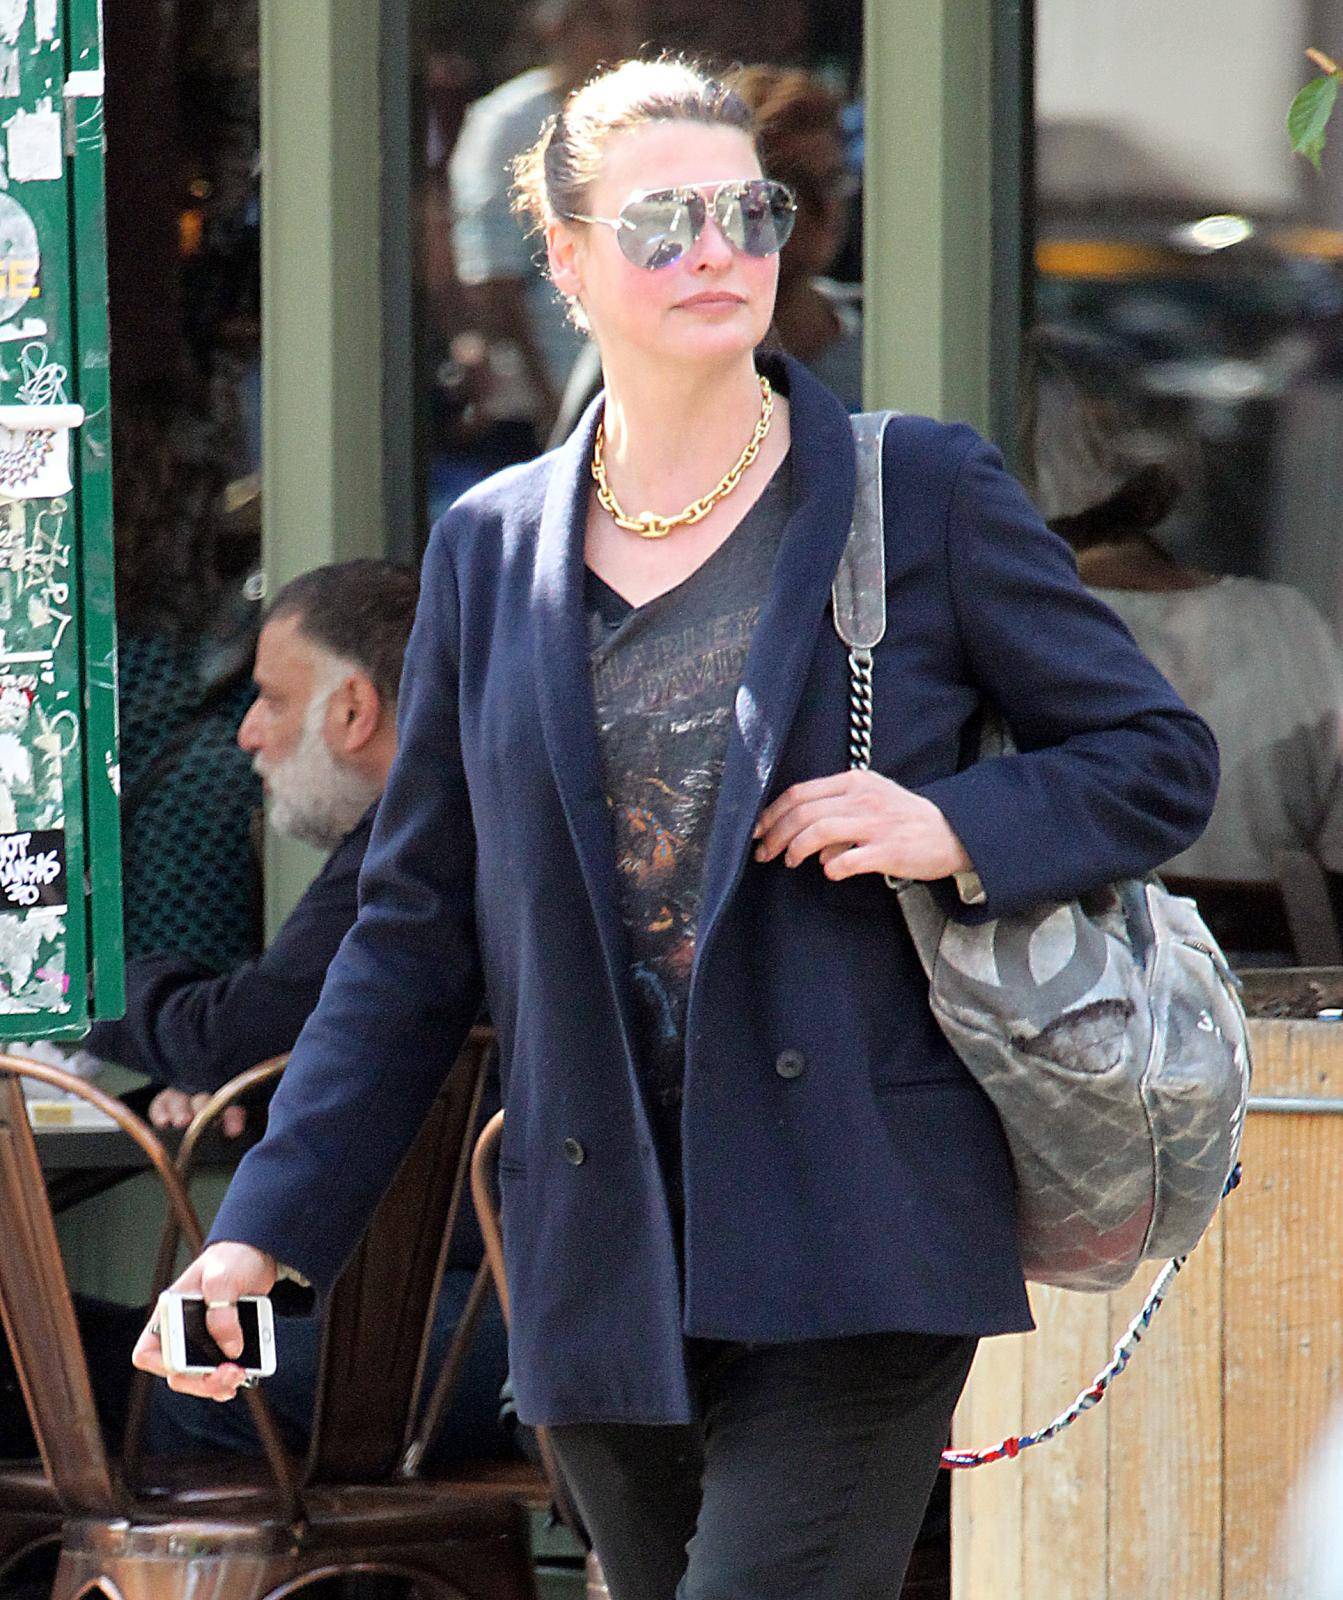 Linda Evangelista out in New York